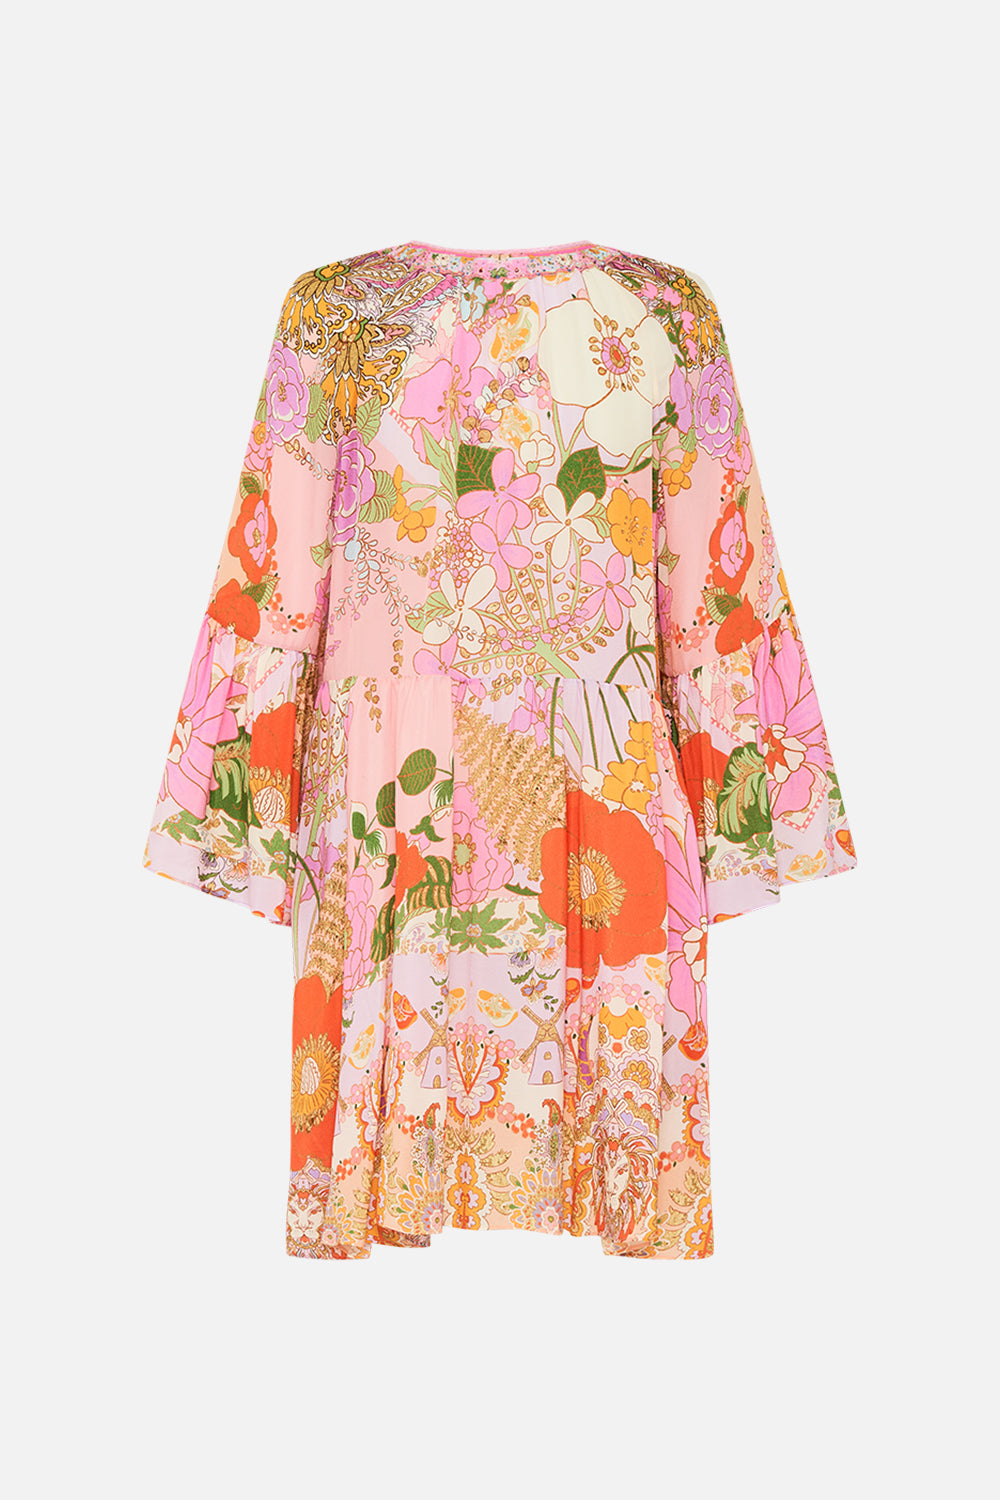 CAMILLA floral a line dress in Clever Clogs print